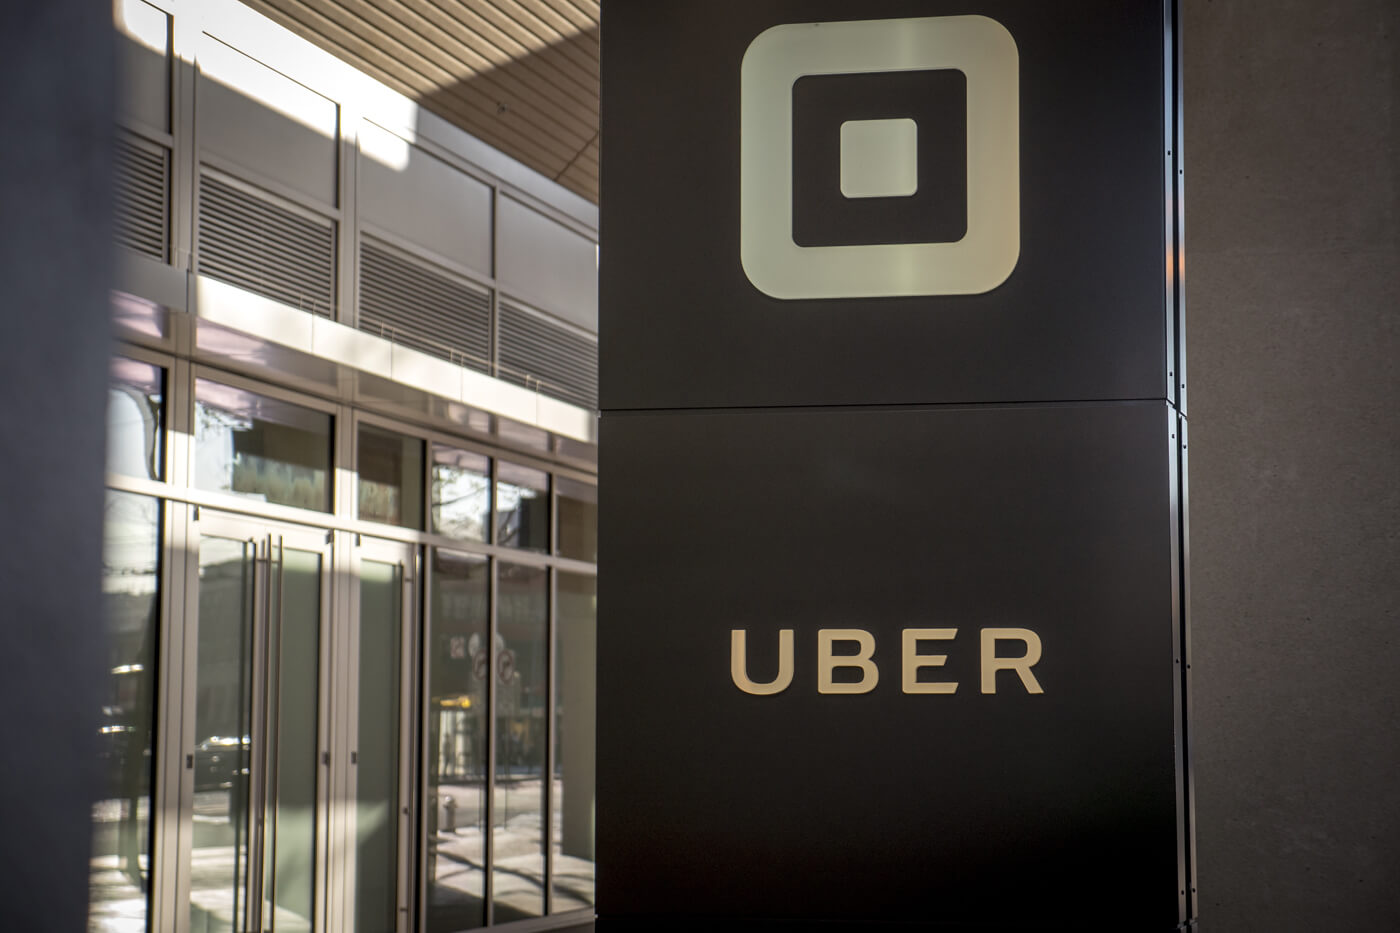 Uber stock soars as CEO says company is well positioned to ride out coronavirus